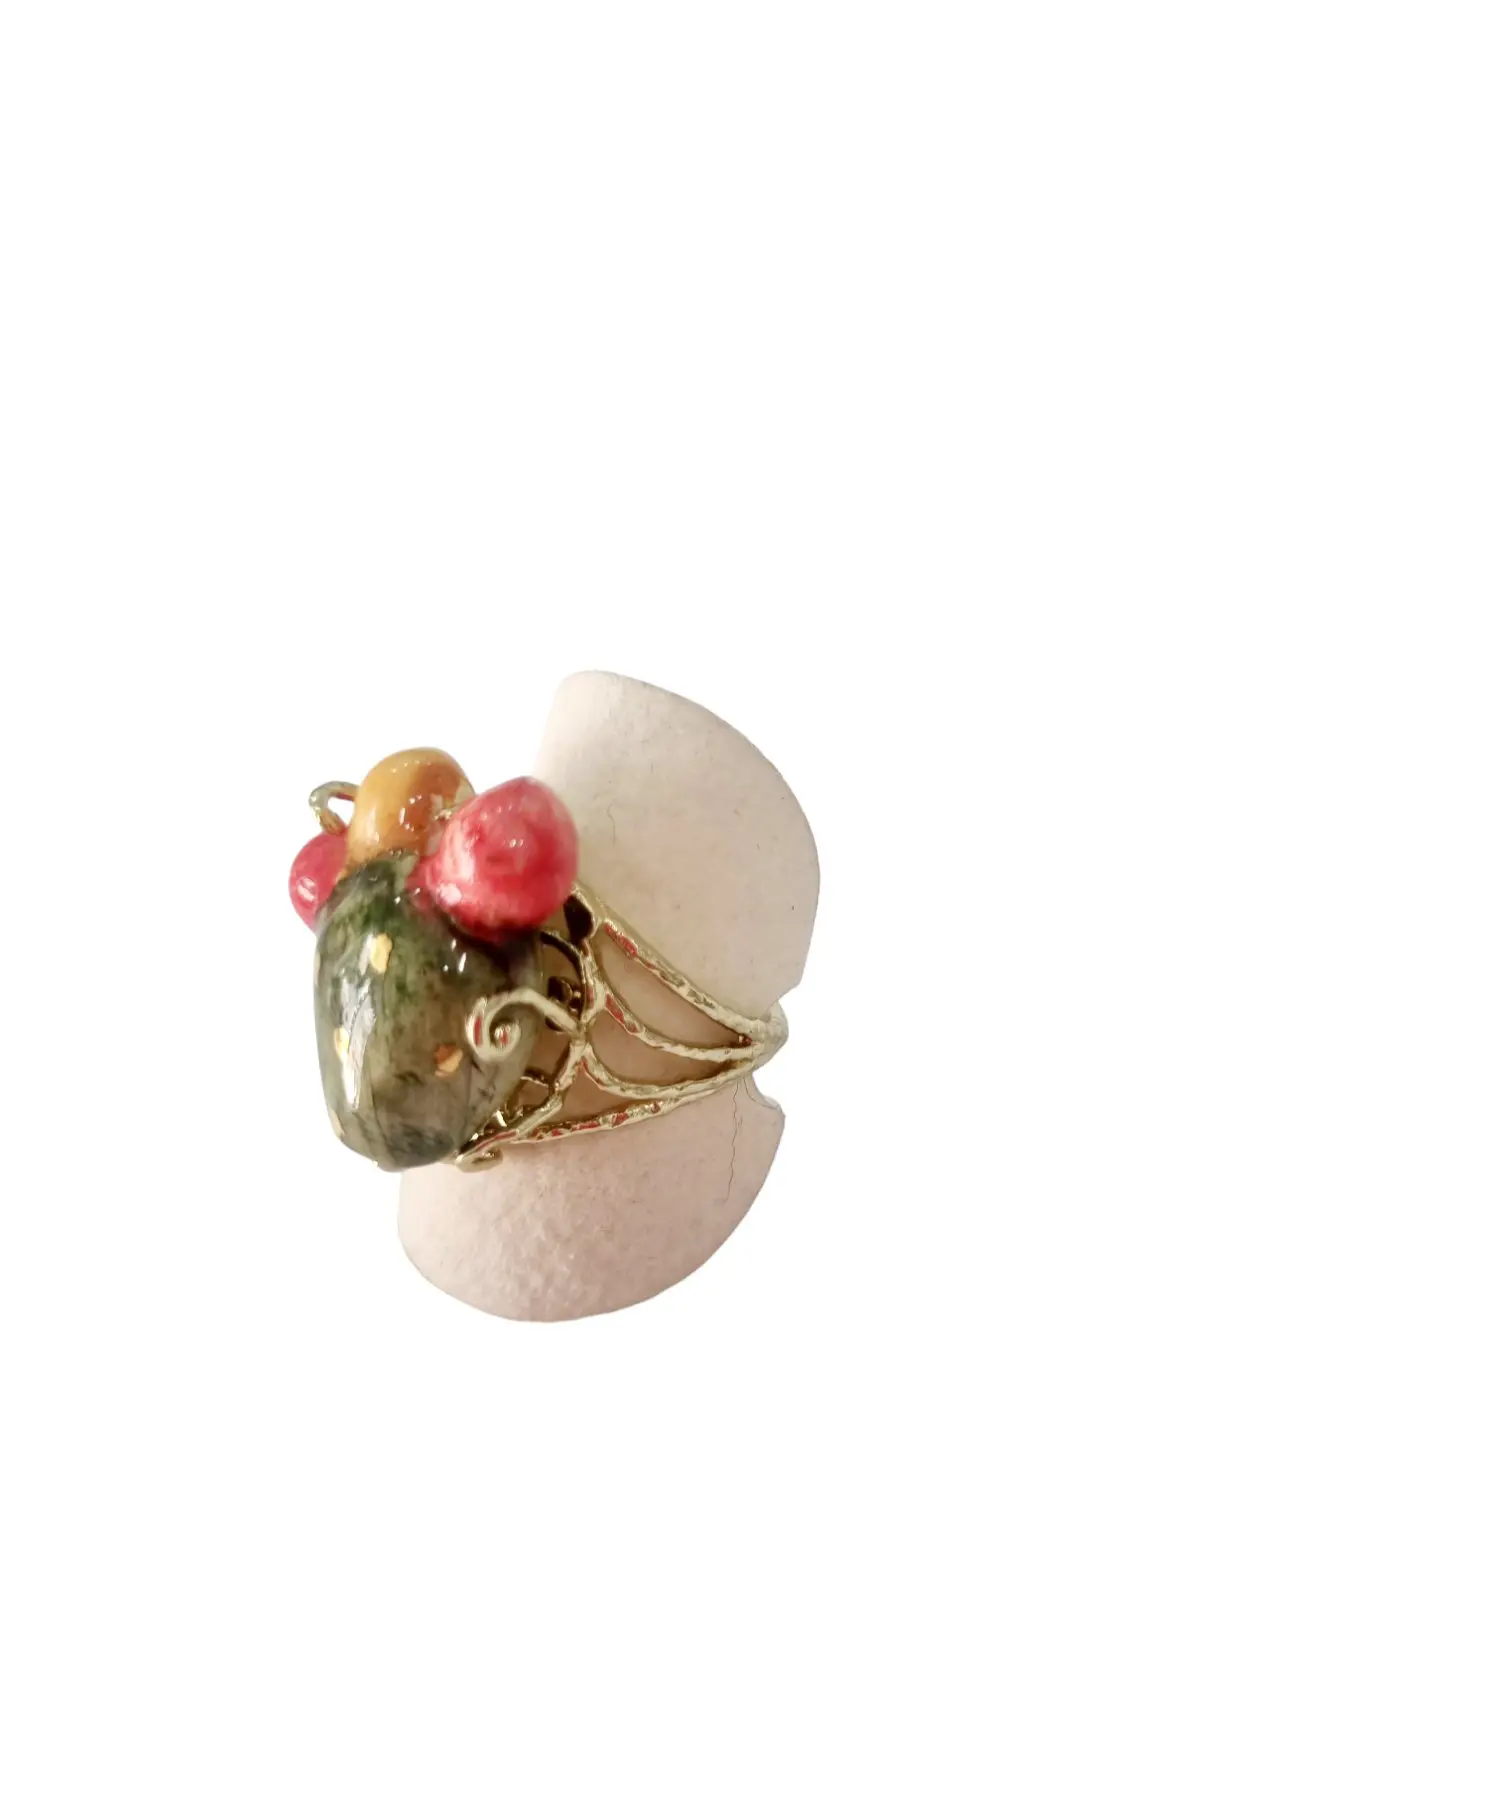 Adjustable ring on brass base with cactus painted on Caltagirone ceramic.